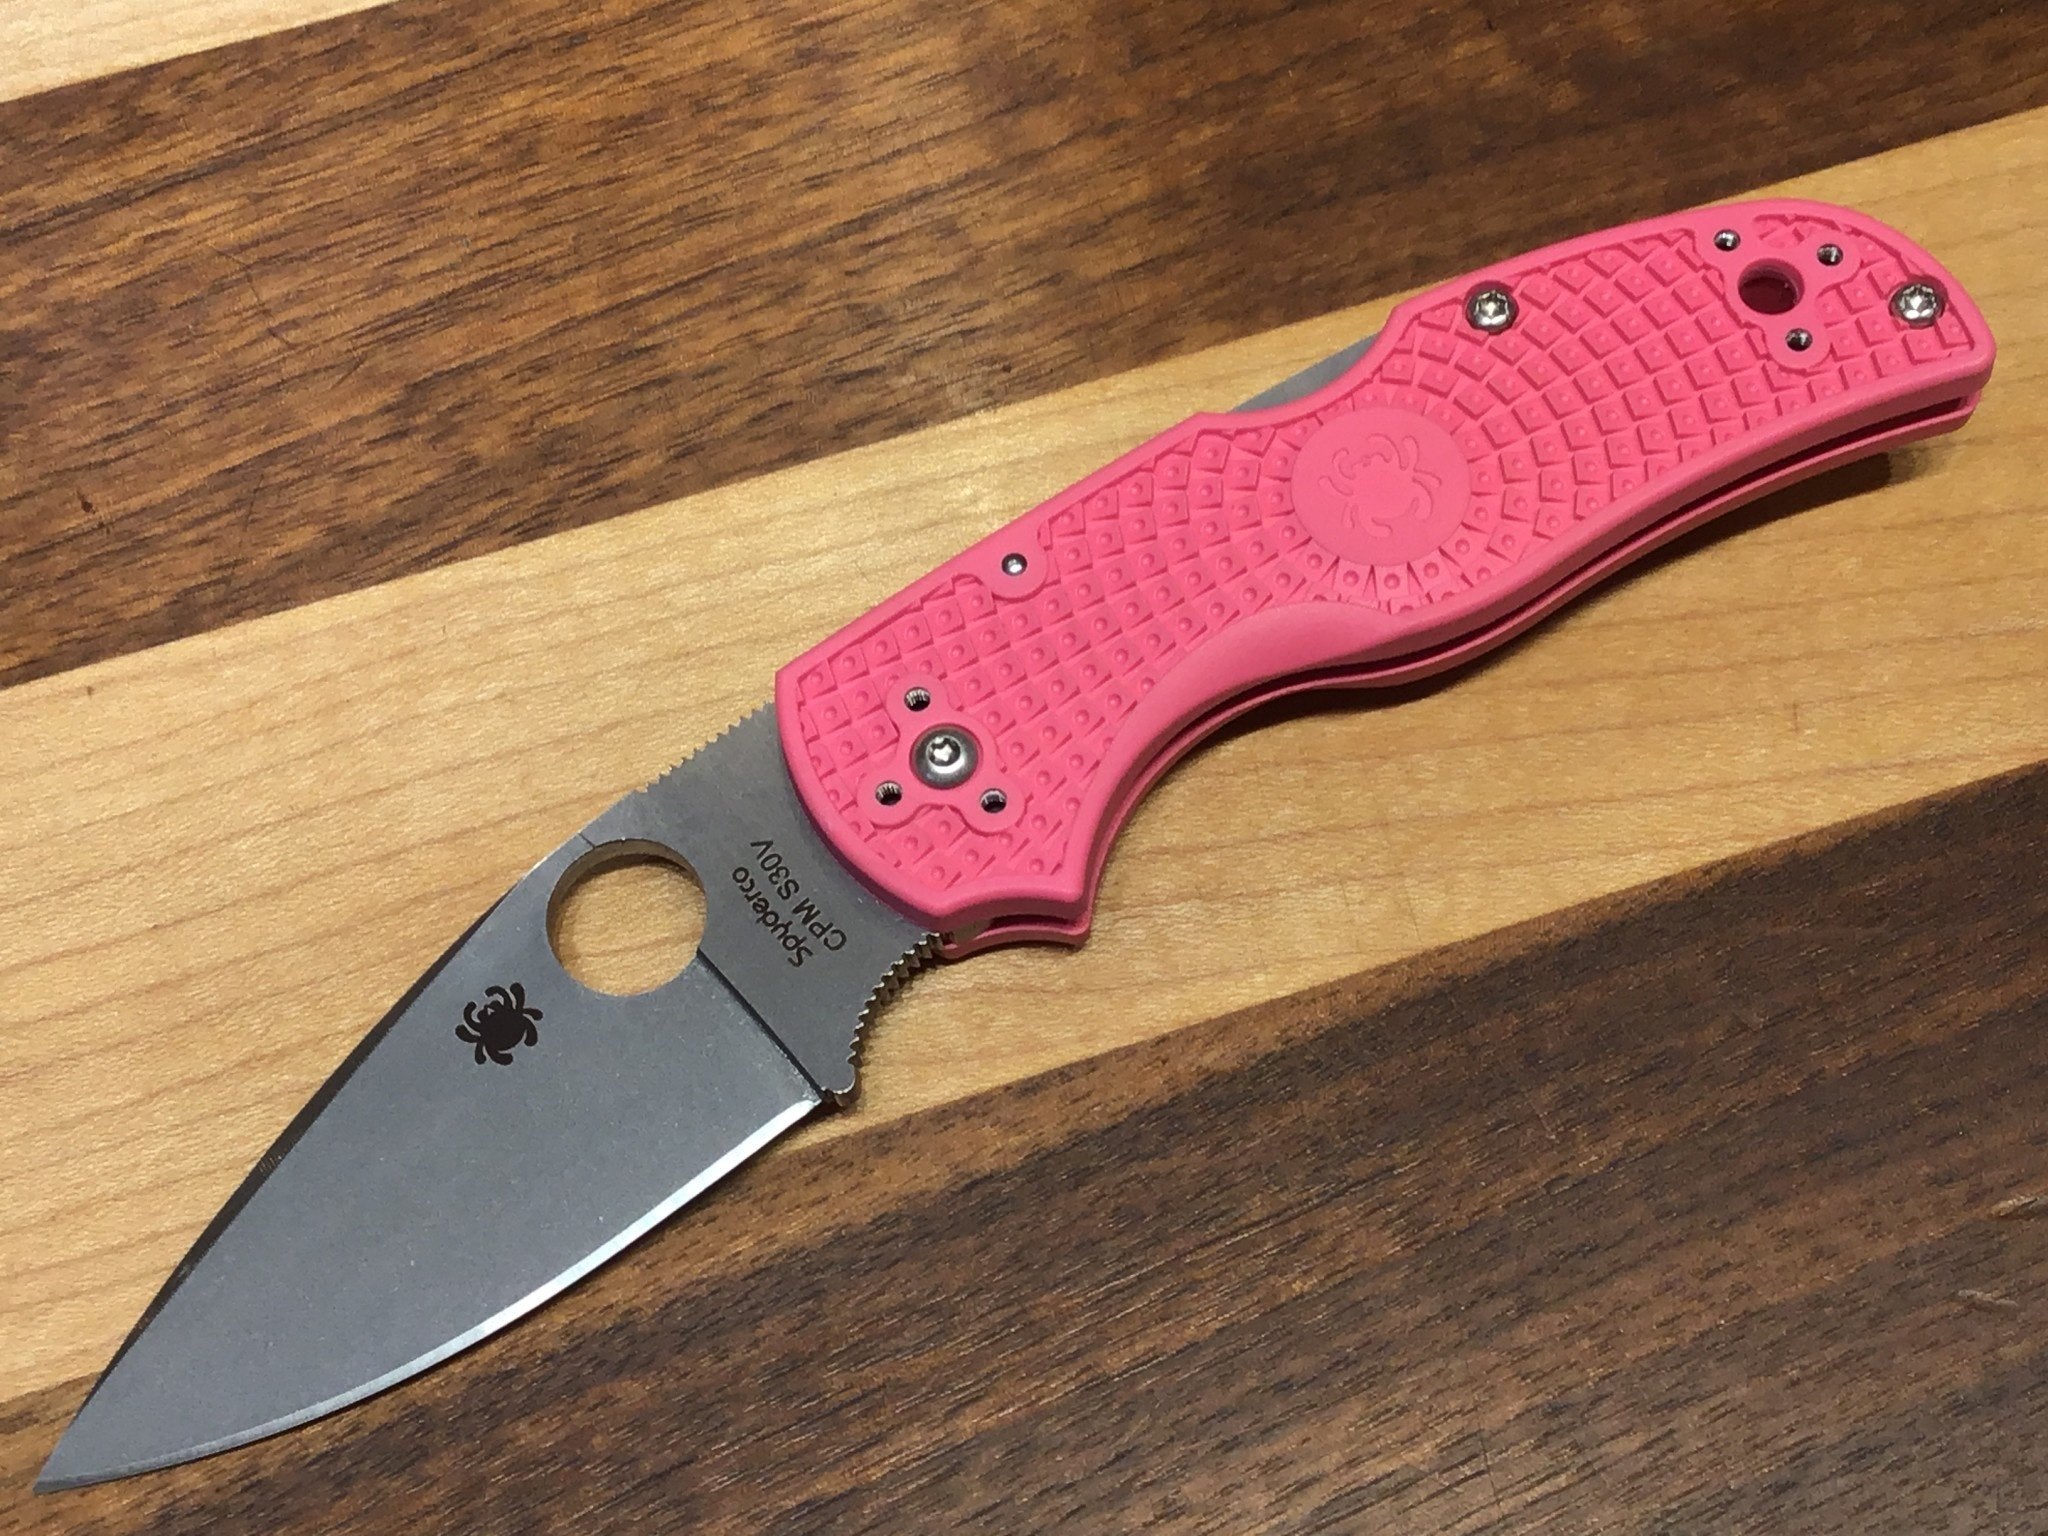 Spyderco Native 5 in Pink FRN and CPM S30V